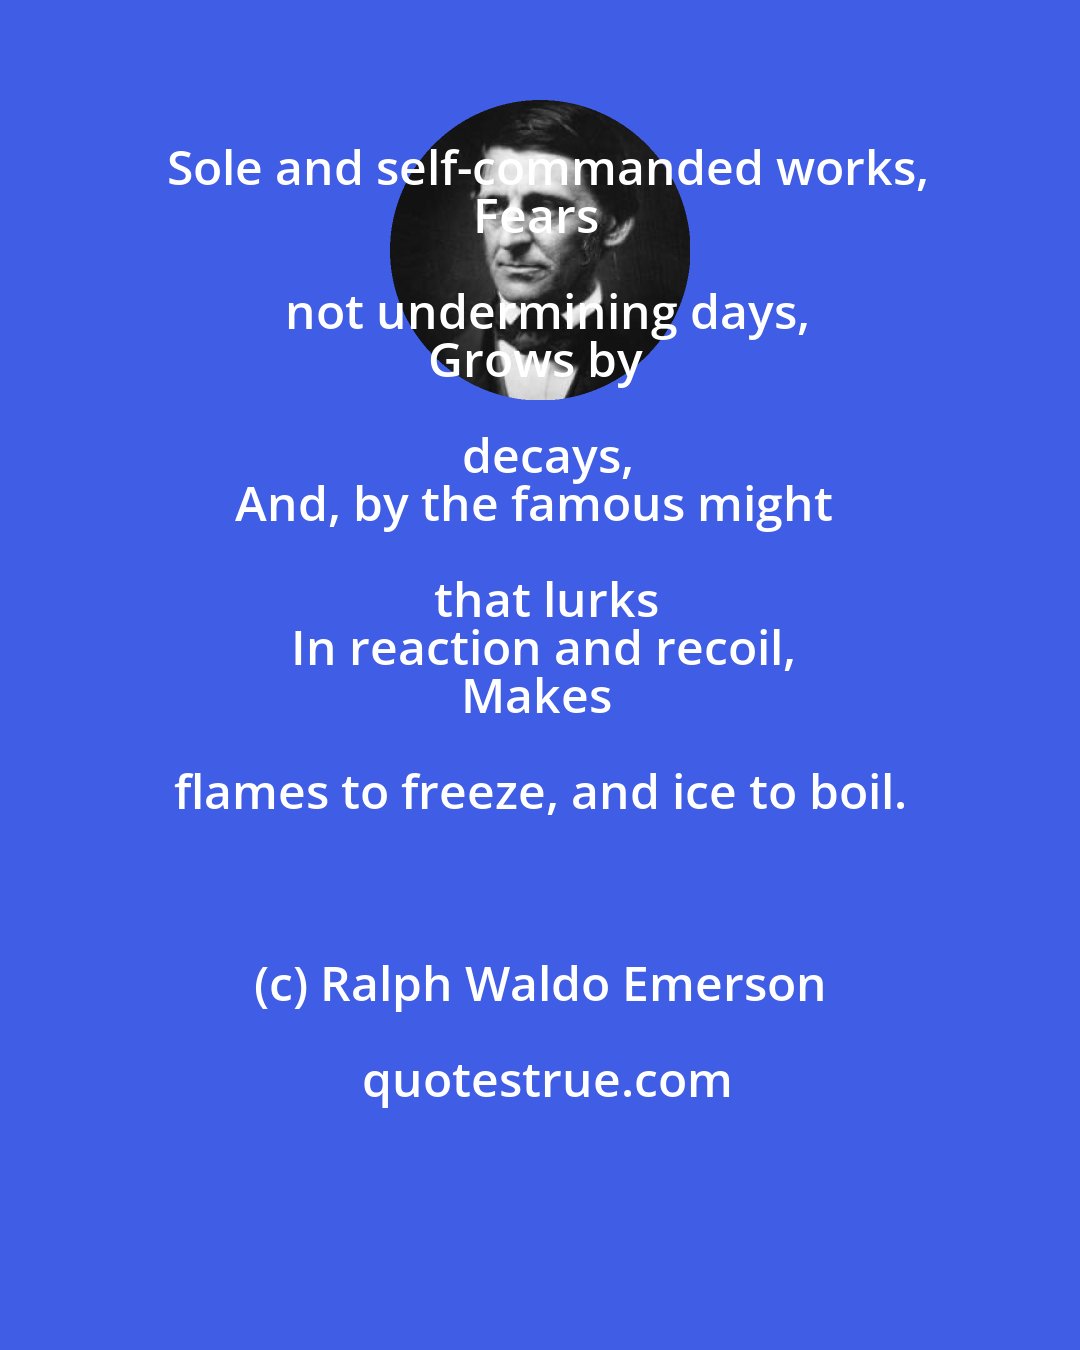 Ralph Waldo Emerson: Sole and self-commanded works,
Fears not undermining days,
Grows by decays,
And, by the famous might that lurks
In reaction and recoil,
Makes flames to freeze, and ice to boil.